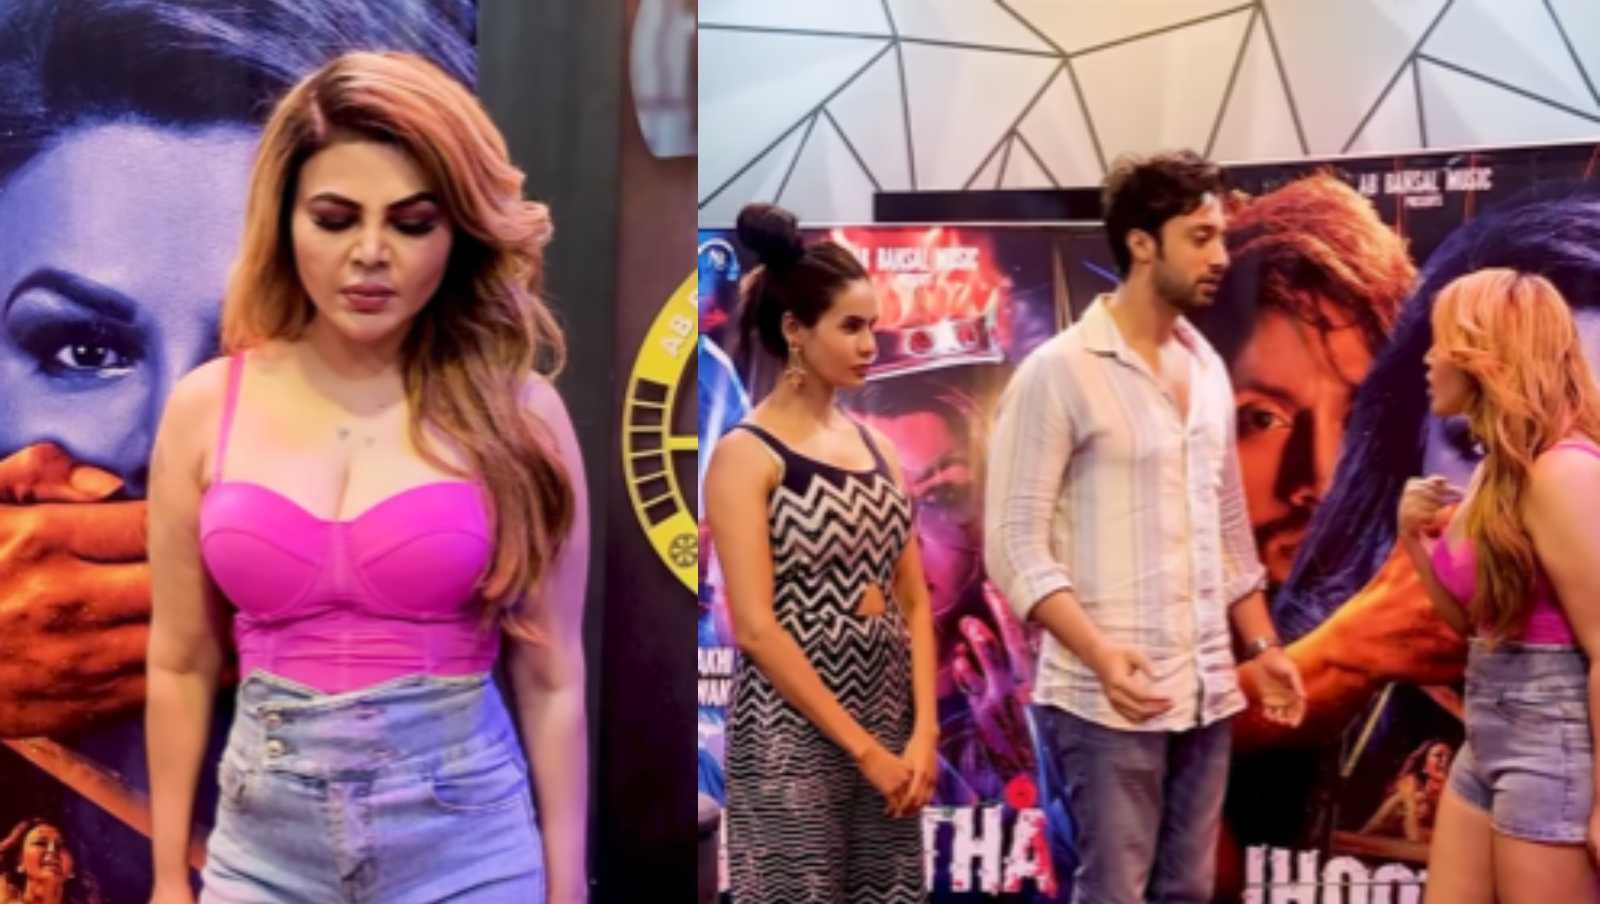 'Even got the actor to look like Tanu' : Rakhi Sawant recreates her heartbreak story with Adil in latest video, netizens react